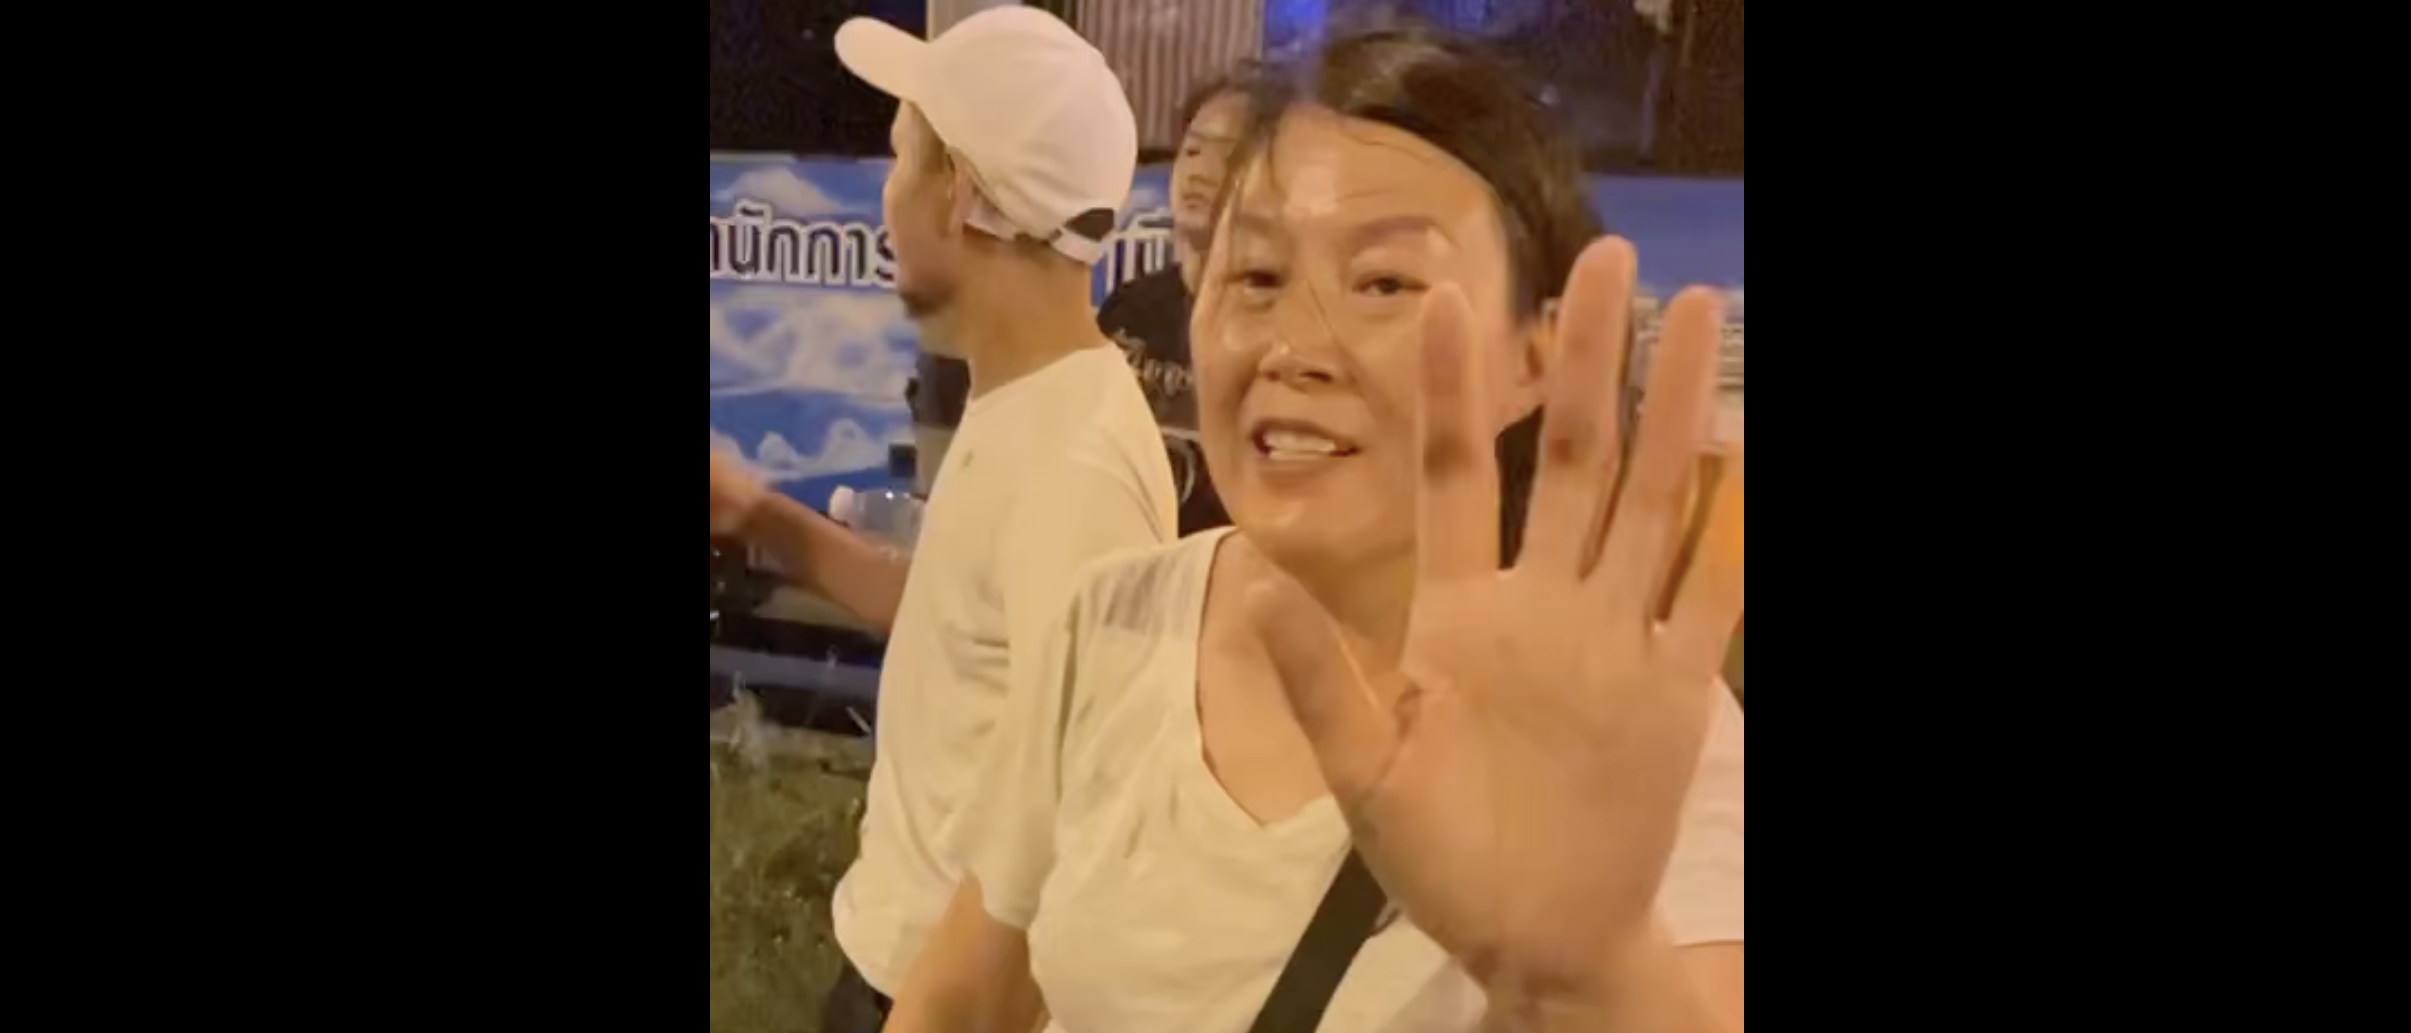 A member of the Mayflower Church shows injuries she claims to have received from Thai police. [Image courtesy of ChinaAid]